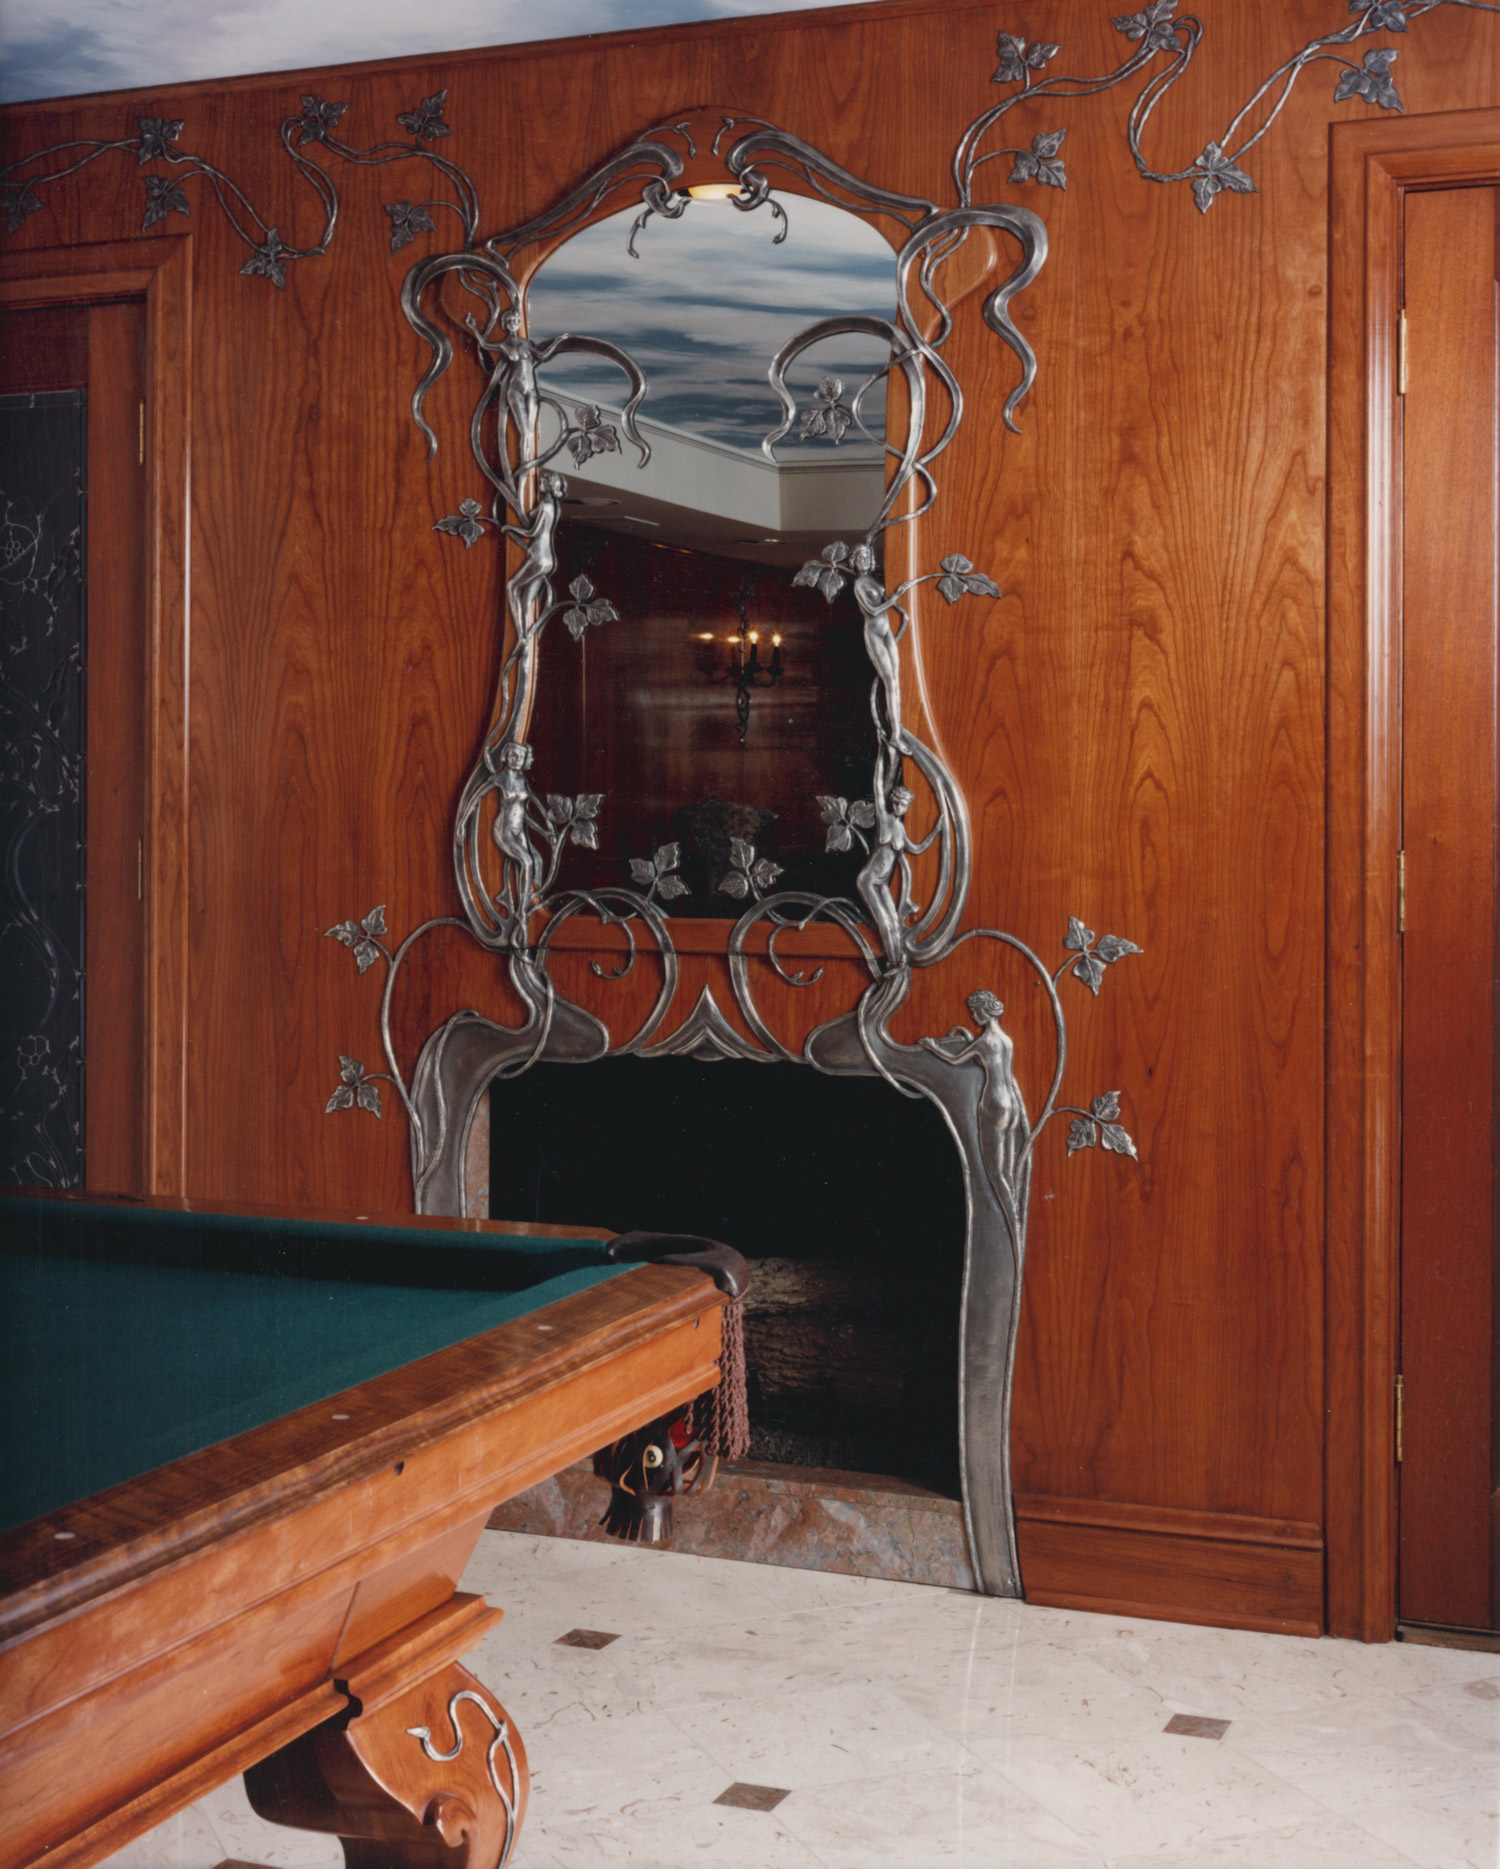 Mirror and Fireplace in Residential Billiards Room designed and exectued by Charles H. Reinike III